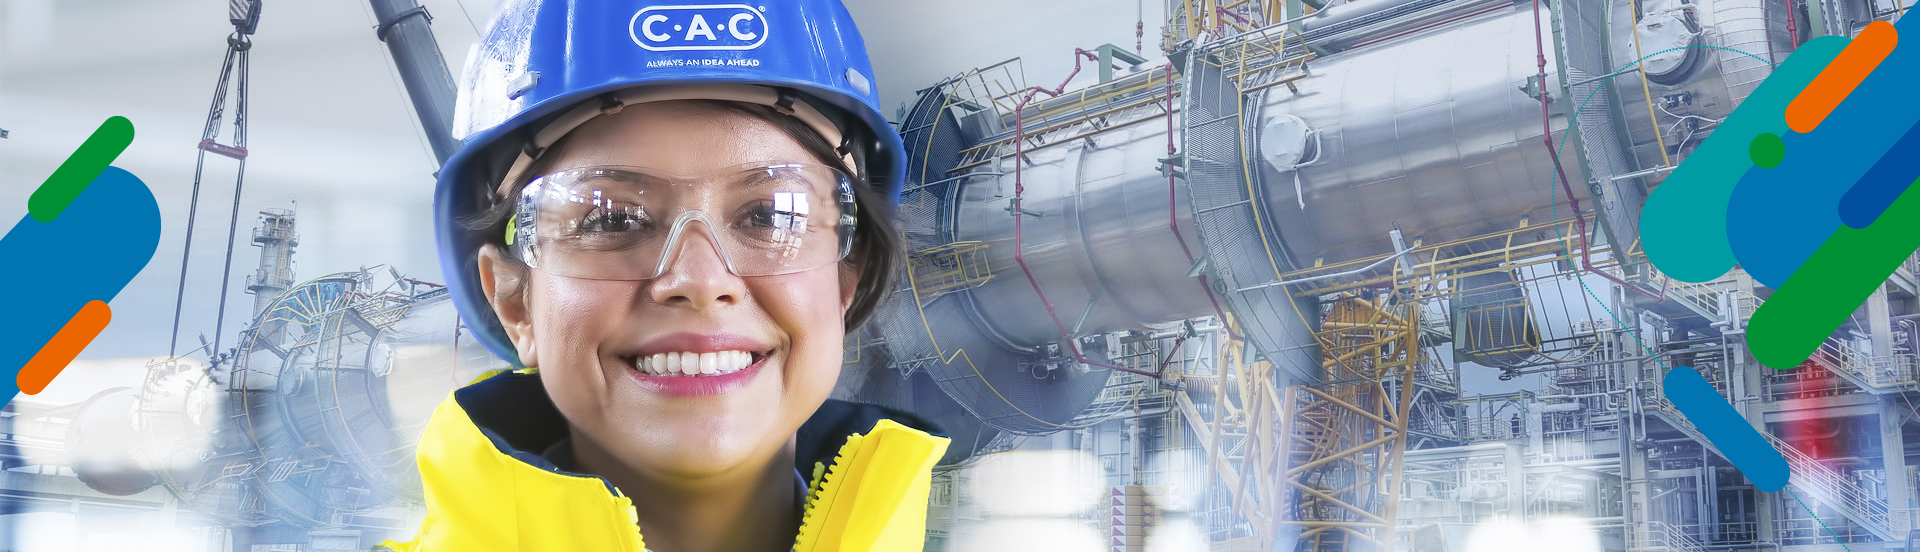 CAC employee wearing protective clothing in front of a chemical plant